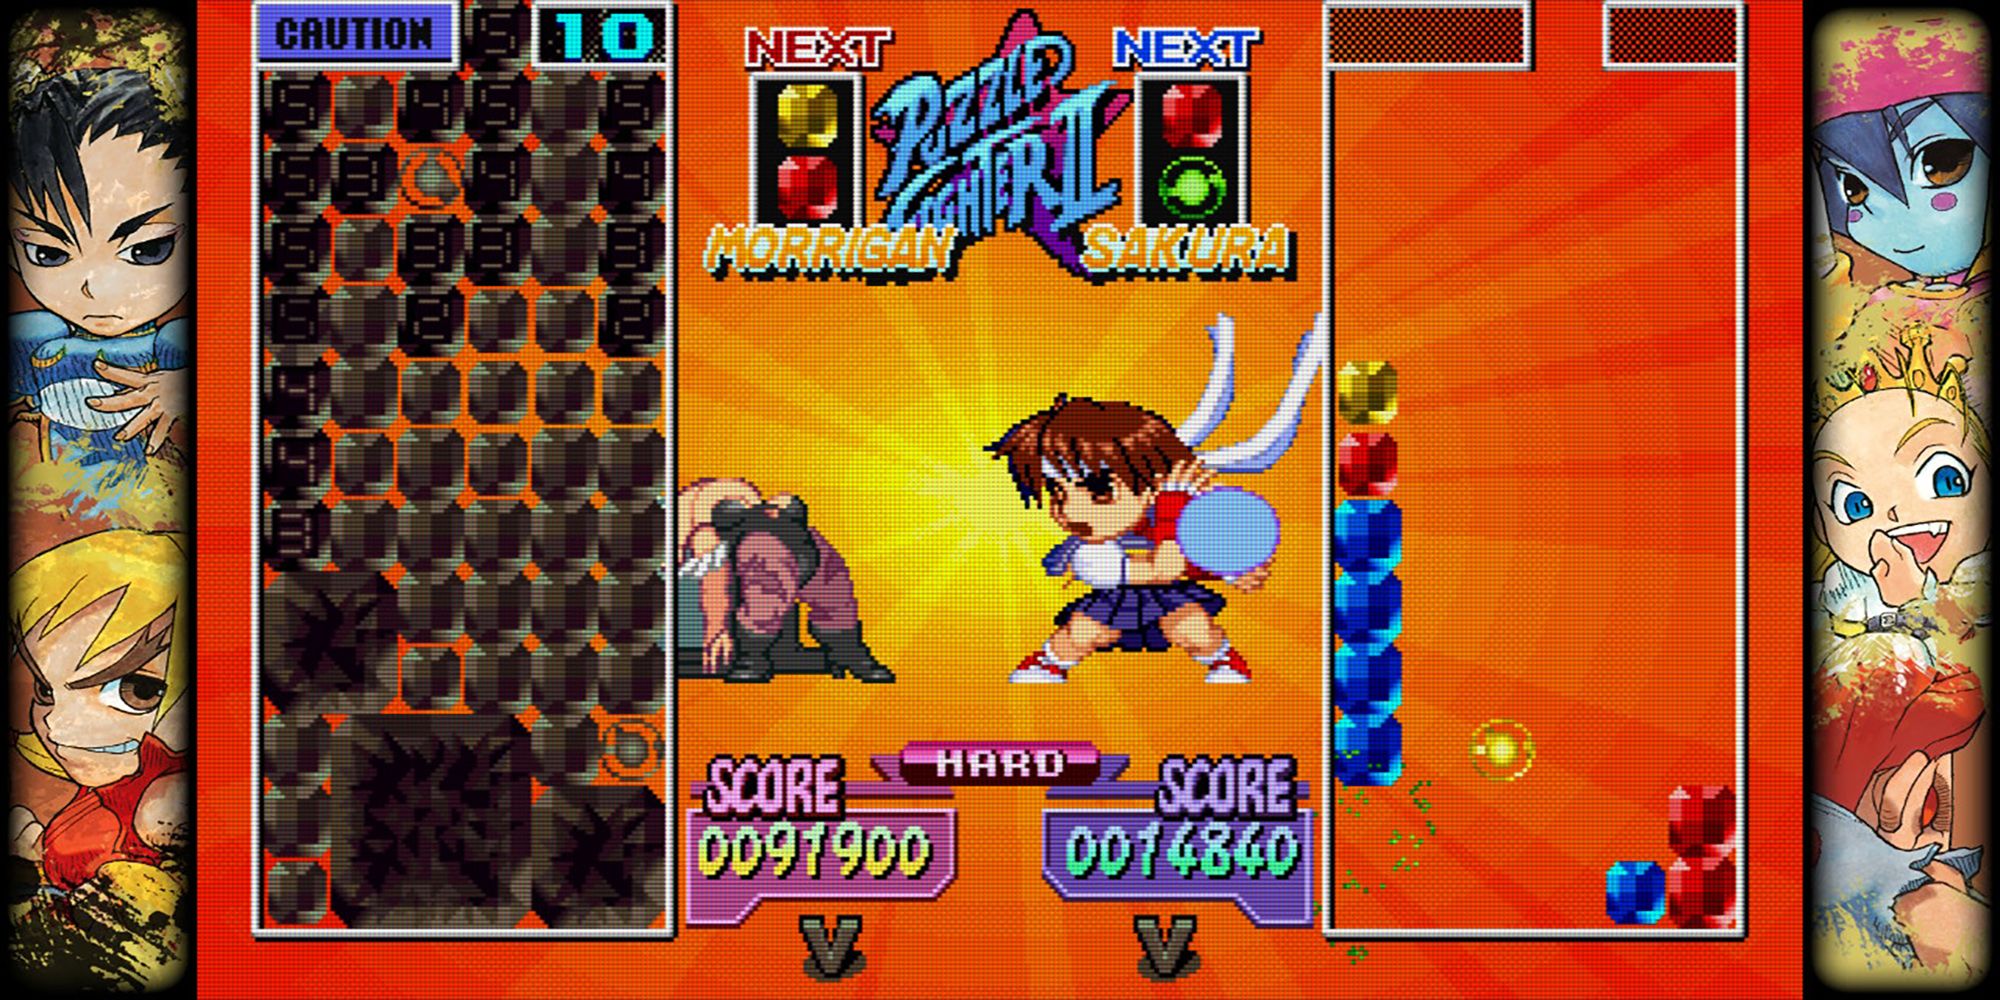 Sakura overpowers Morrigan with a powerful super combo in Super Puzzle Fighter 2 Turbo, a game in Capcom Fighting Collection.